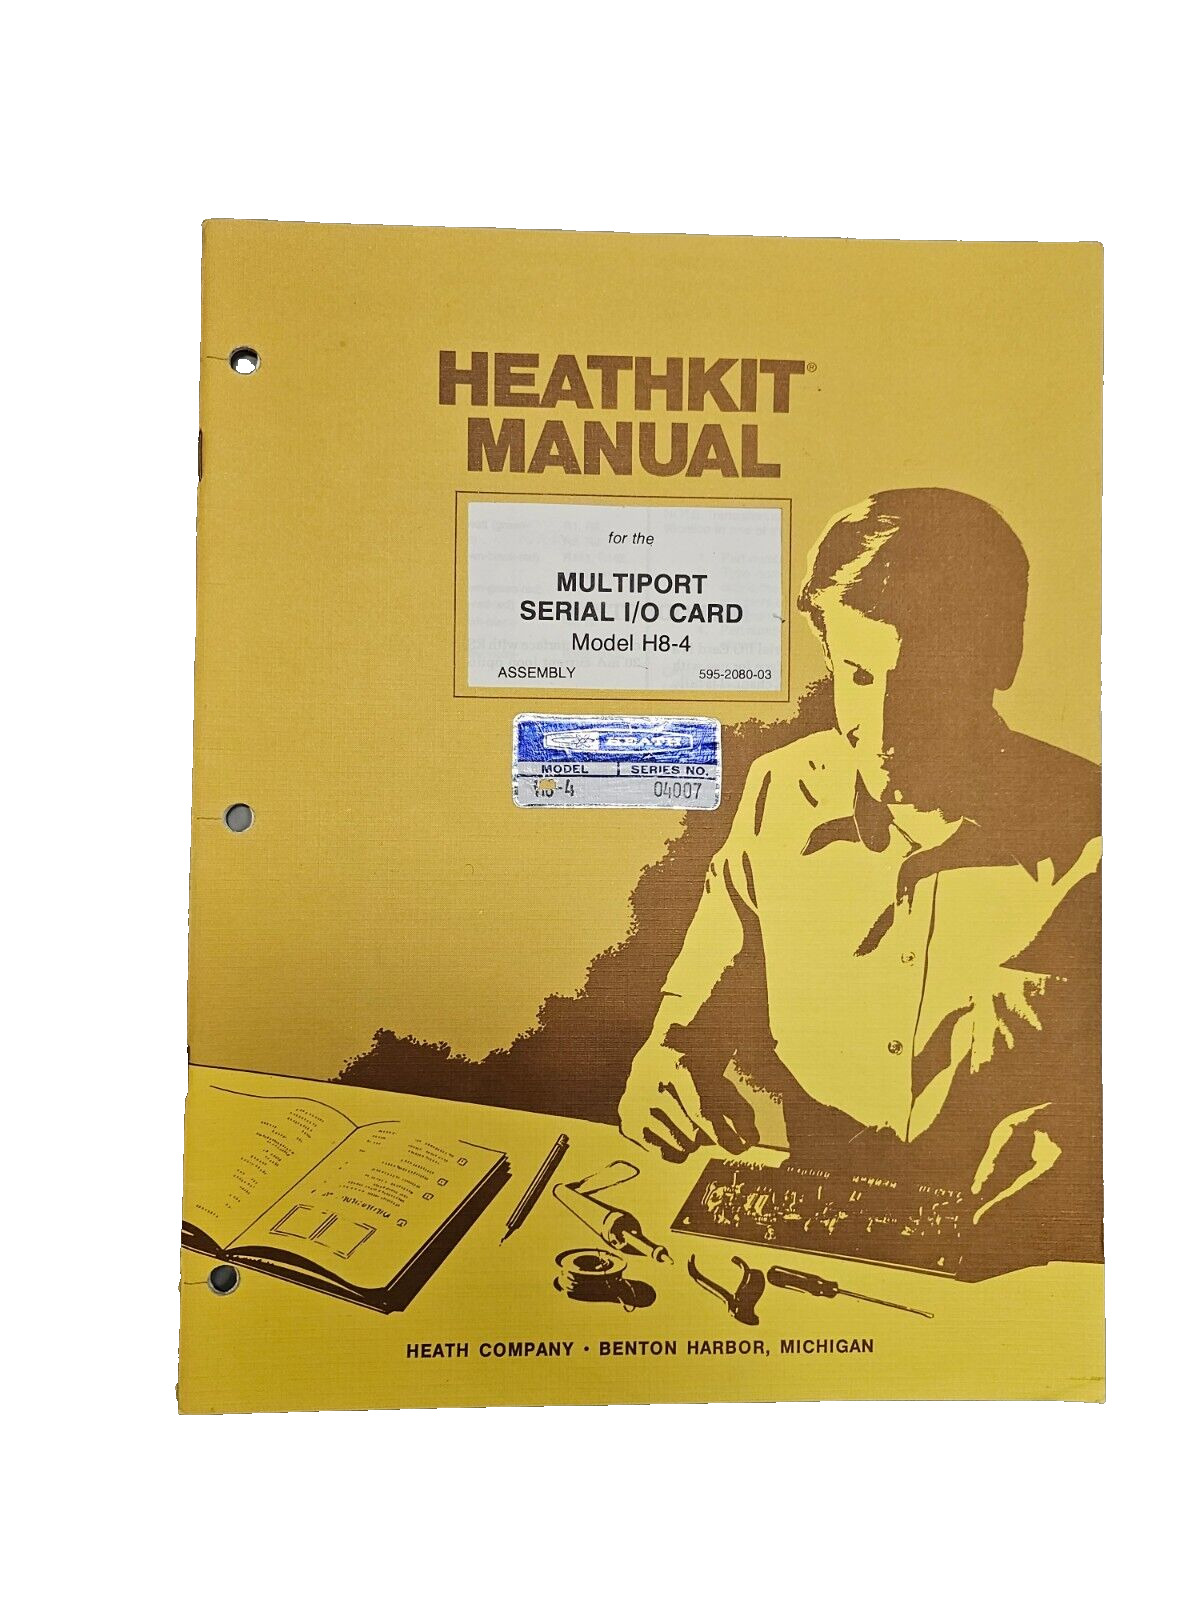 Vintage 70's Heathkit Manual Multiport Serial IO Card H8-4 Assembly 595-2080-03